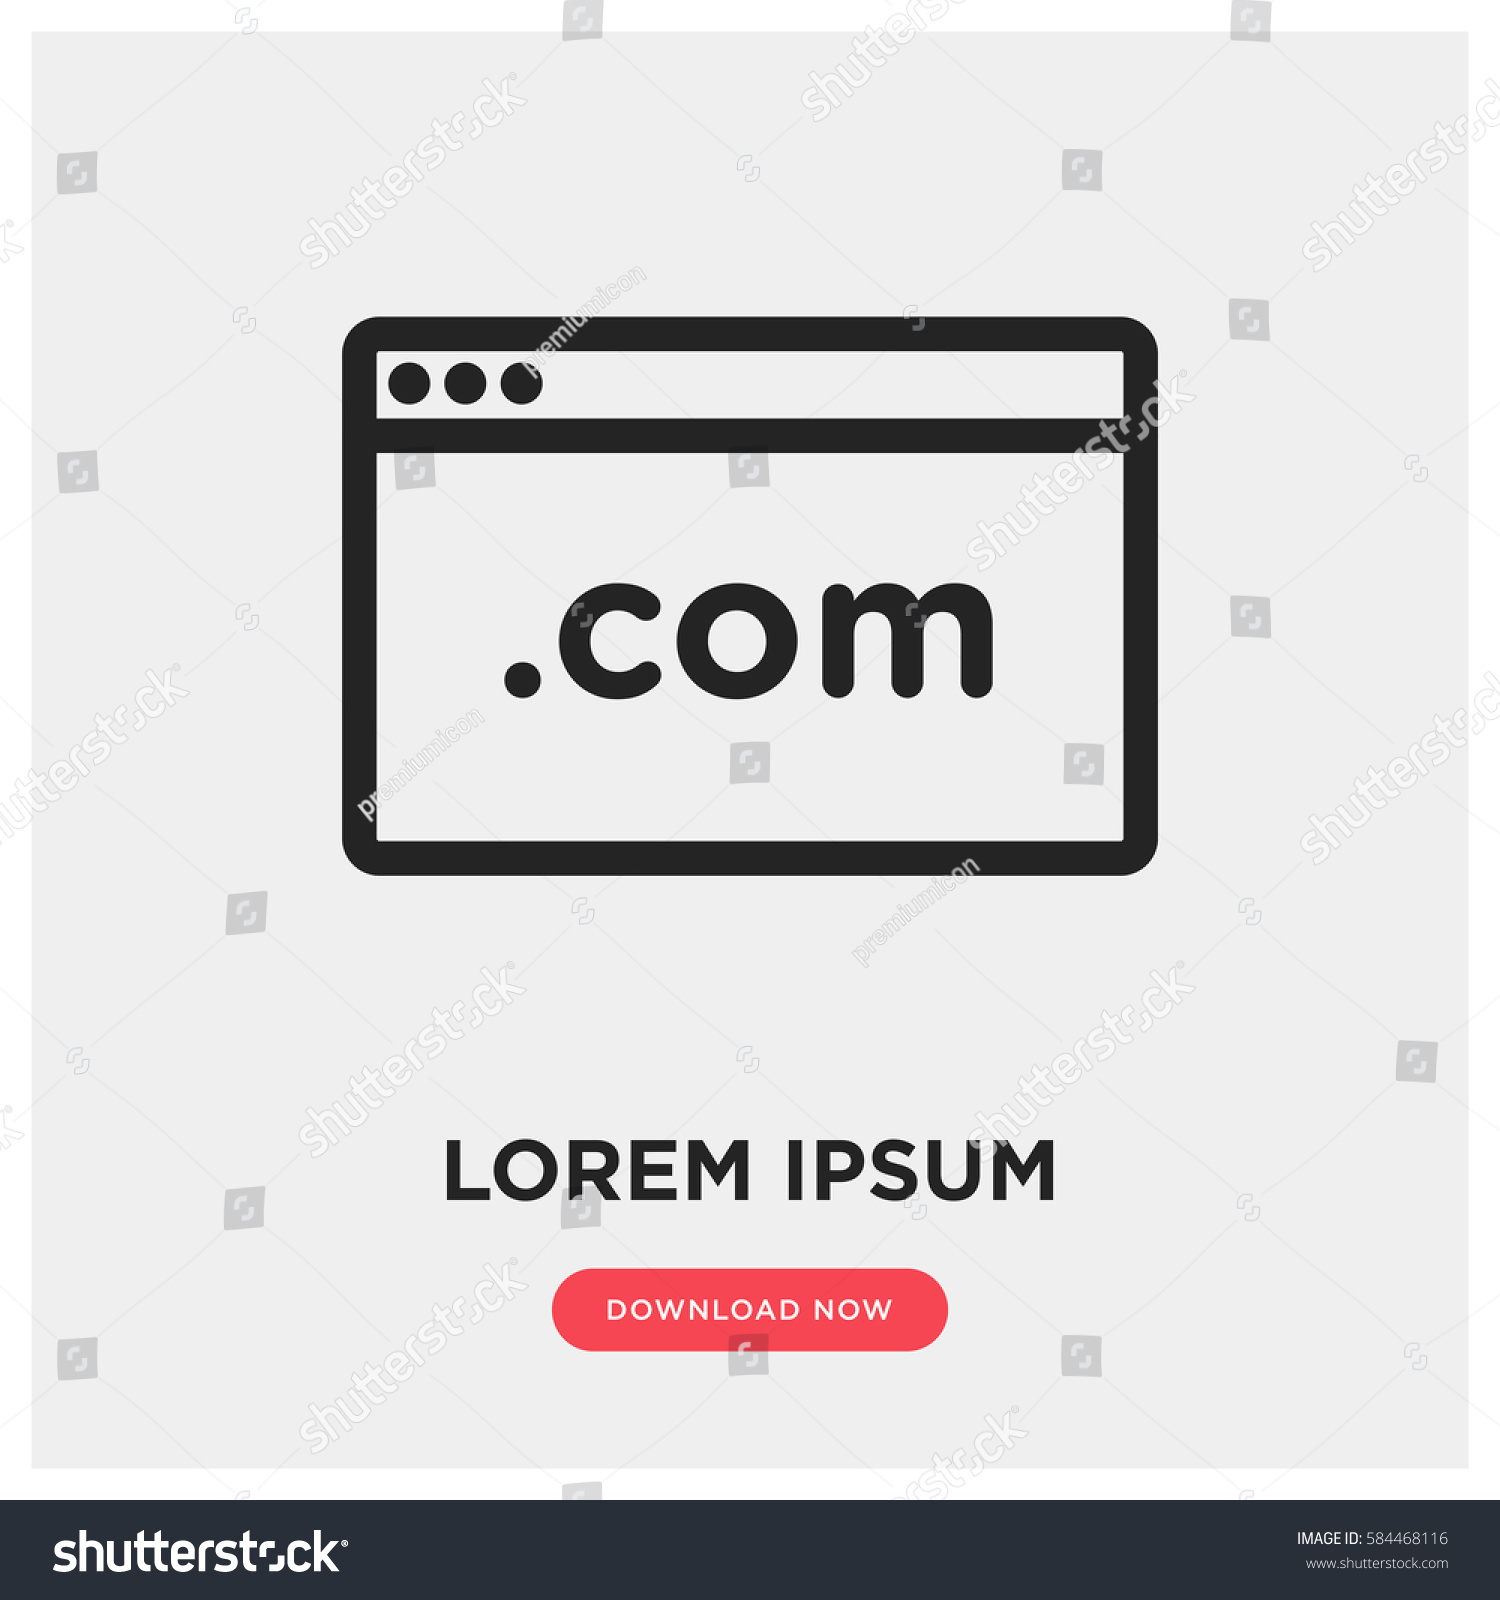 com domain vector icon, website symbol. Modern, simple flat vector illustration for web site or mobile app #584468116